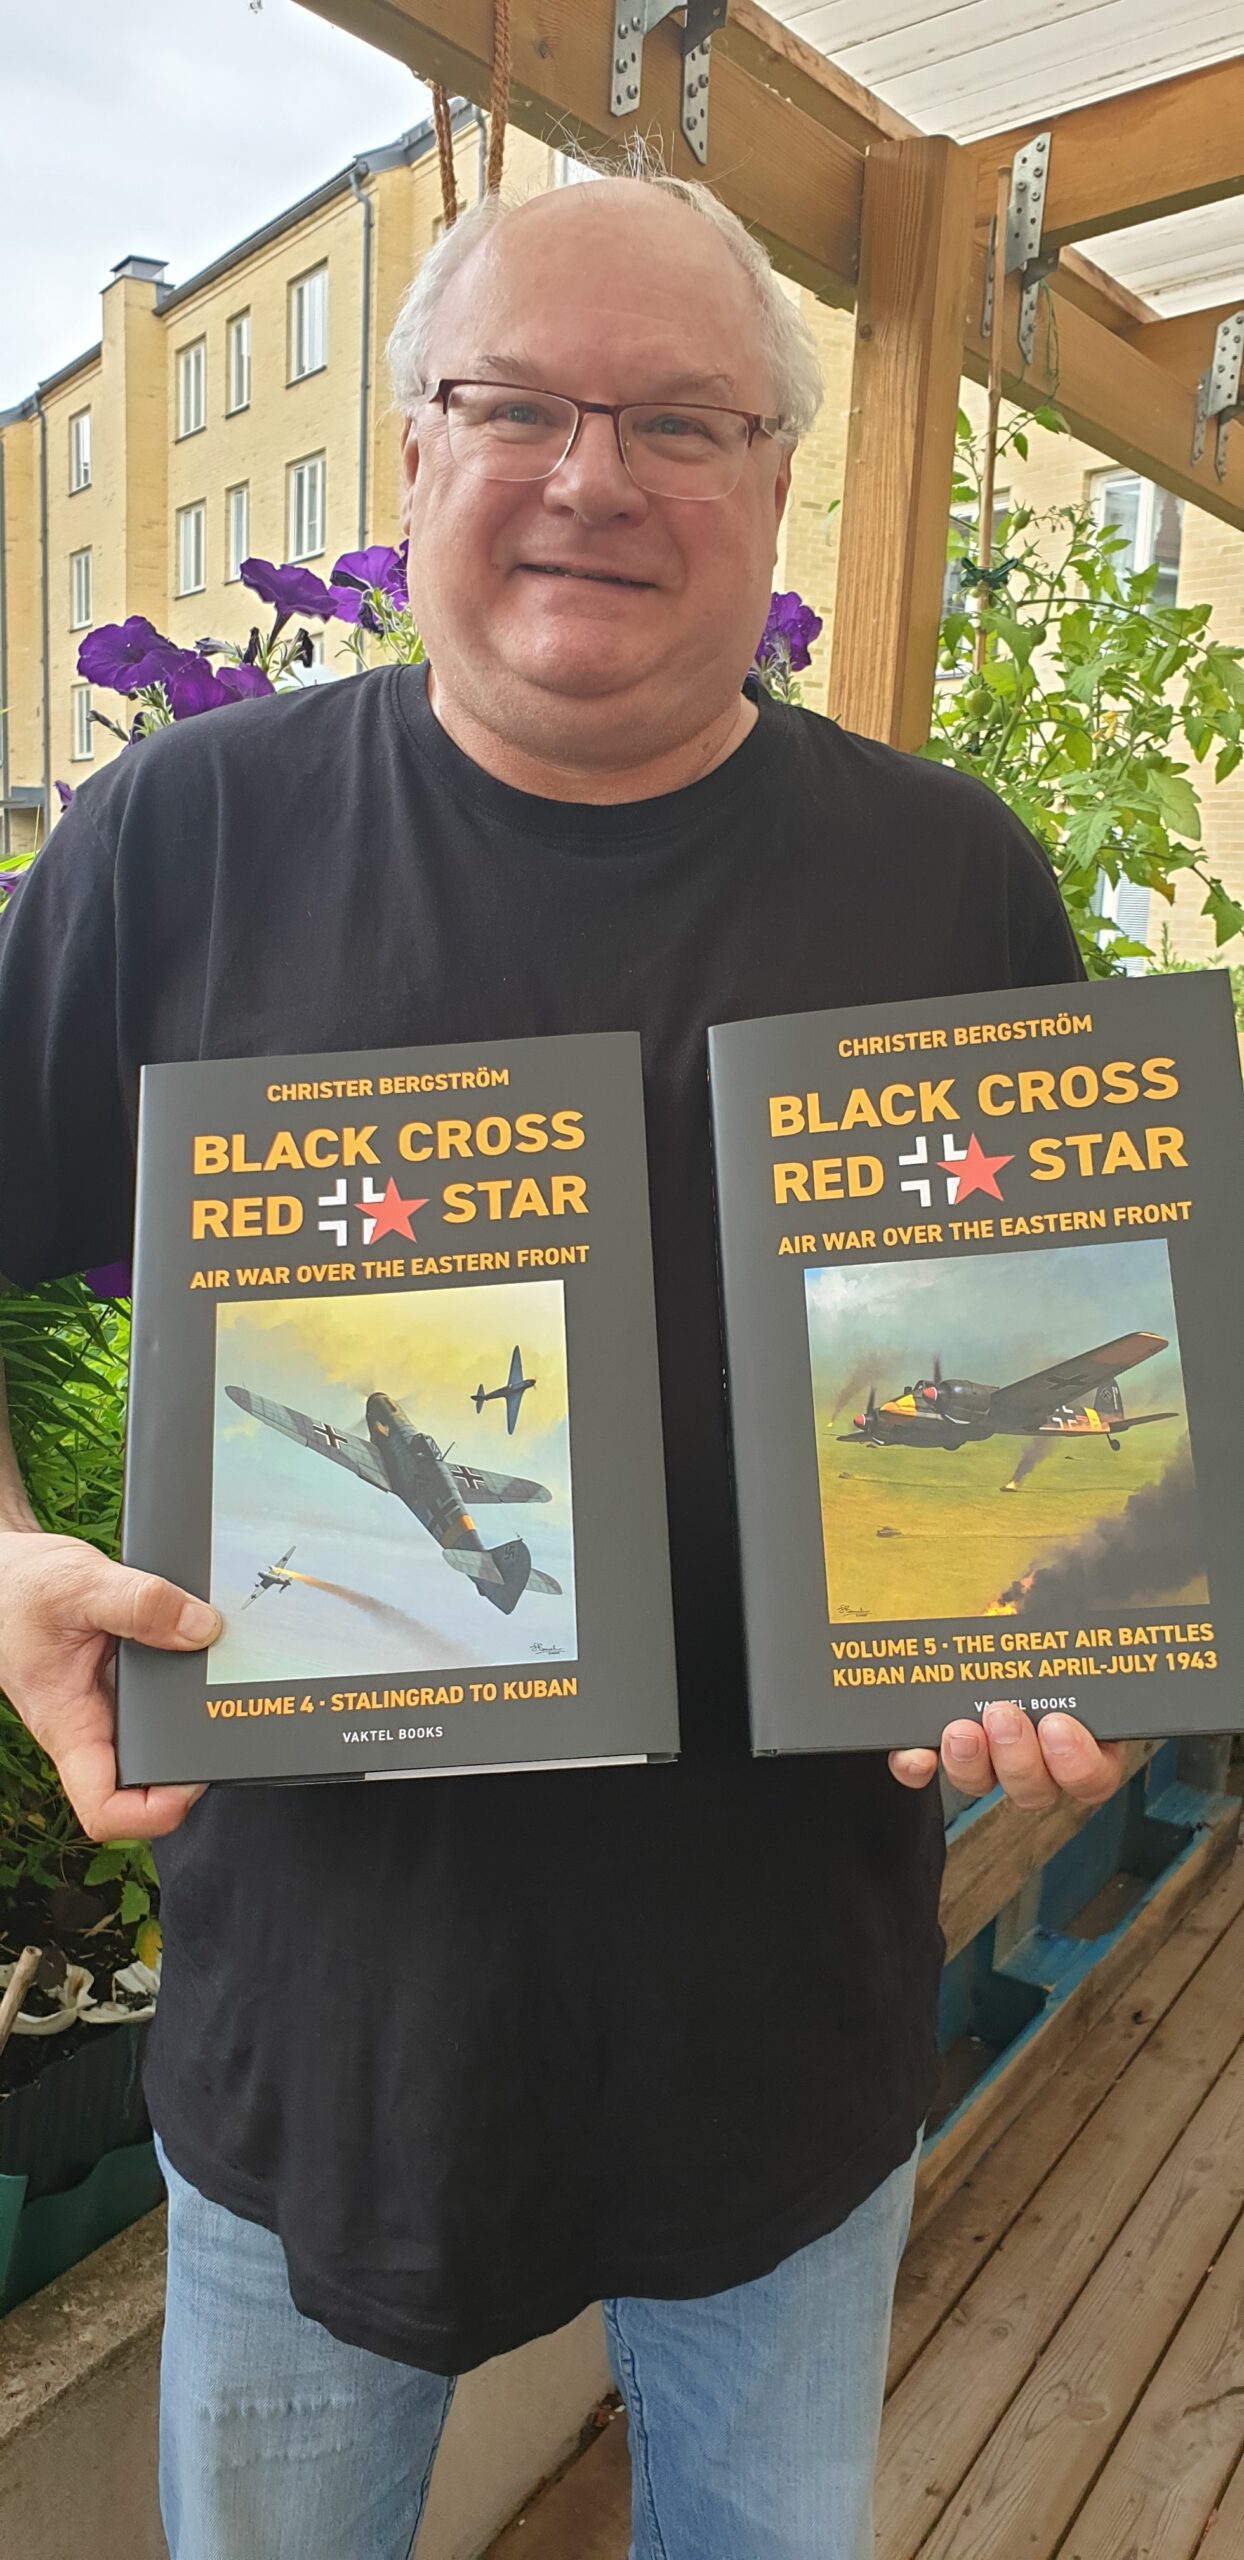 Black Cross Red Star: Air War over the Eastern Front, Vol. 5: Kuban and Kursk har kommit!